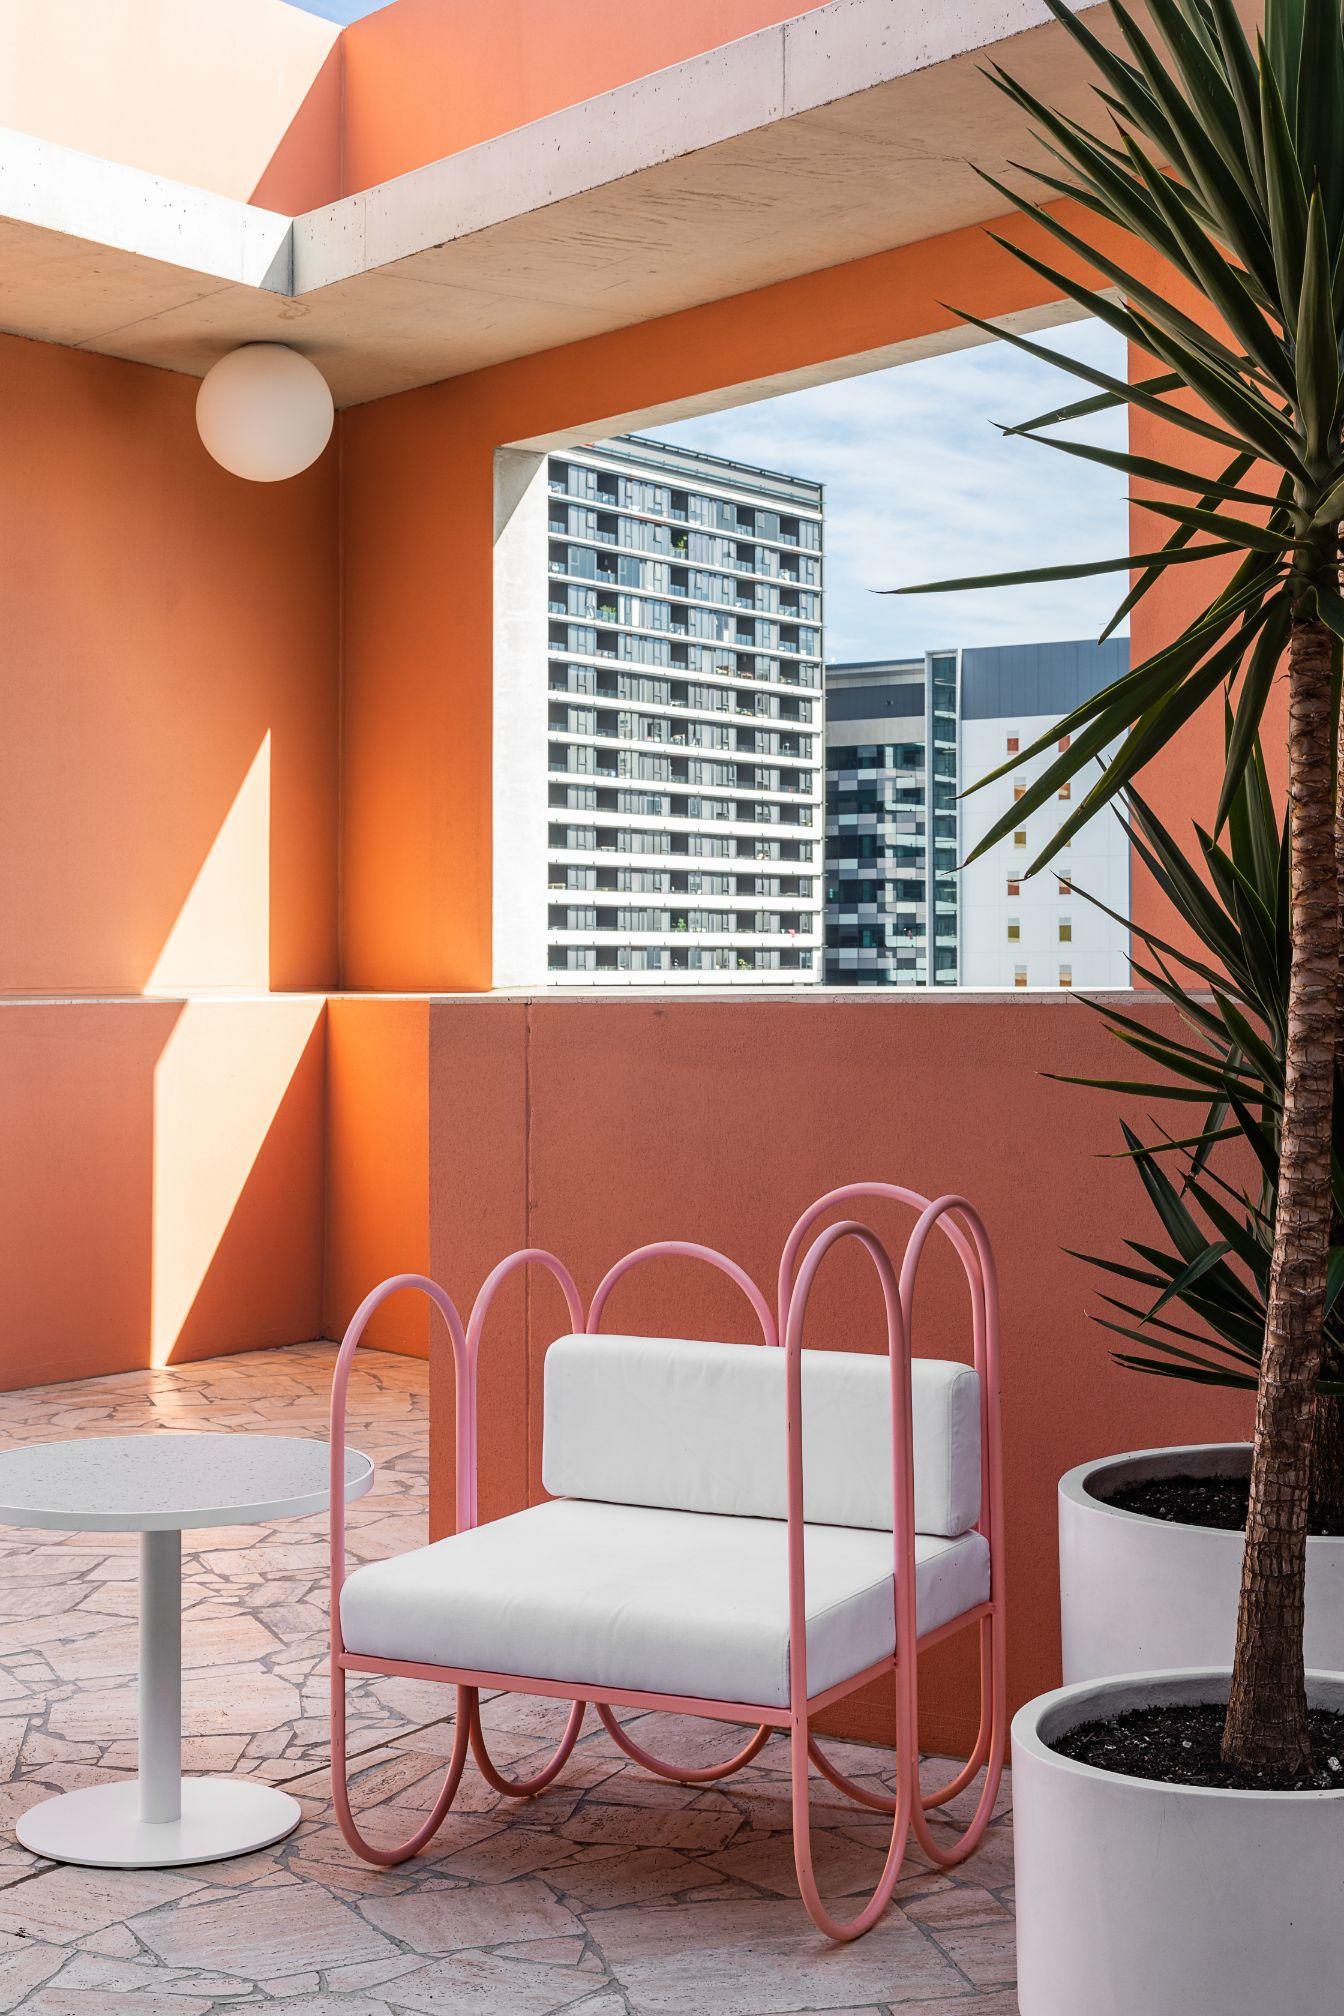 Valiant_events_furniture_hire_styling-the_Calile_hotel_brisbane_miami_lounging_pastel_couch_sofa